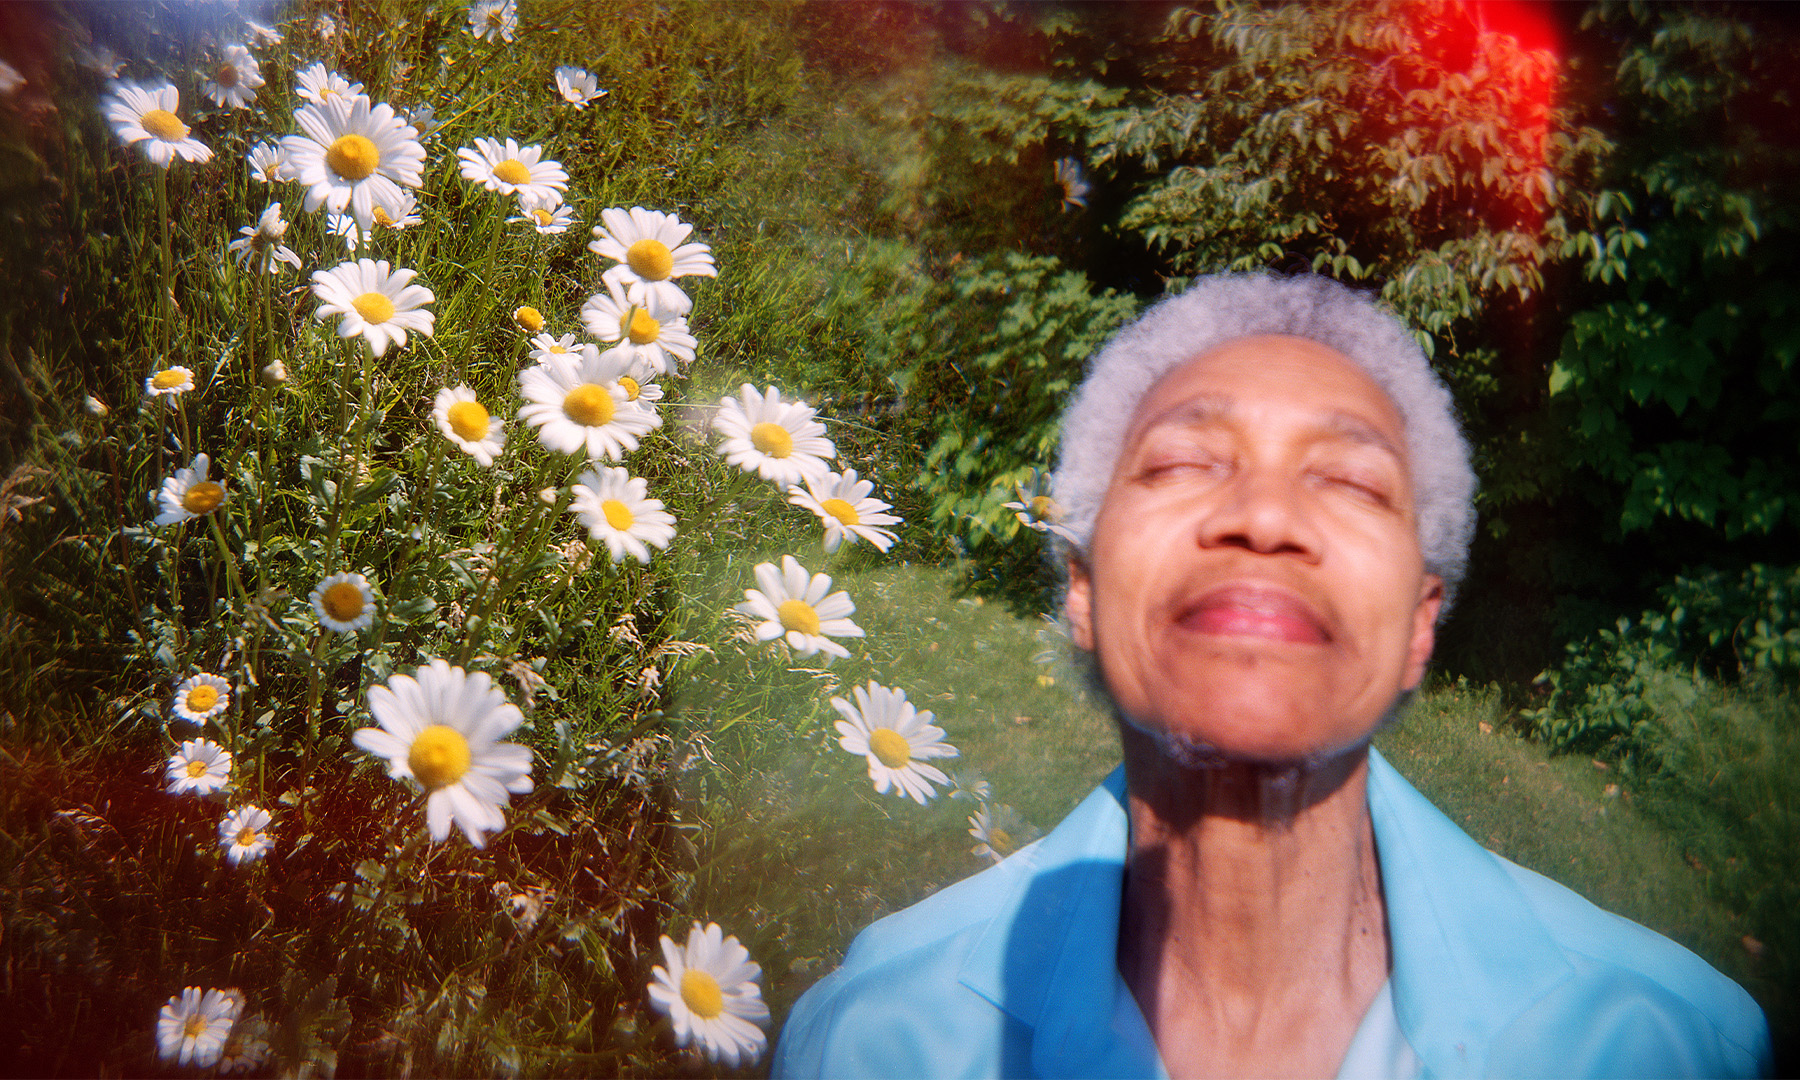 A photo of Beverly Glenn-Copeland looking up the sky with his eyes closed blended over a photo of daisies in a field.